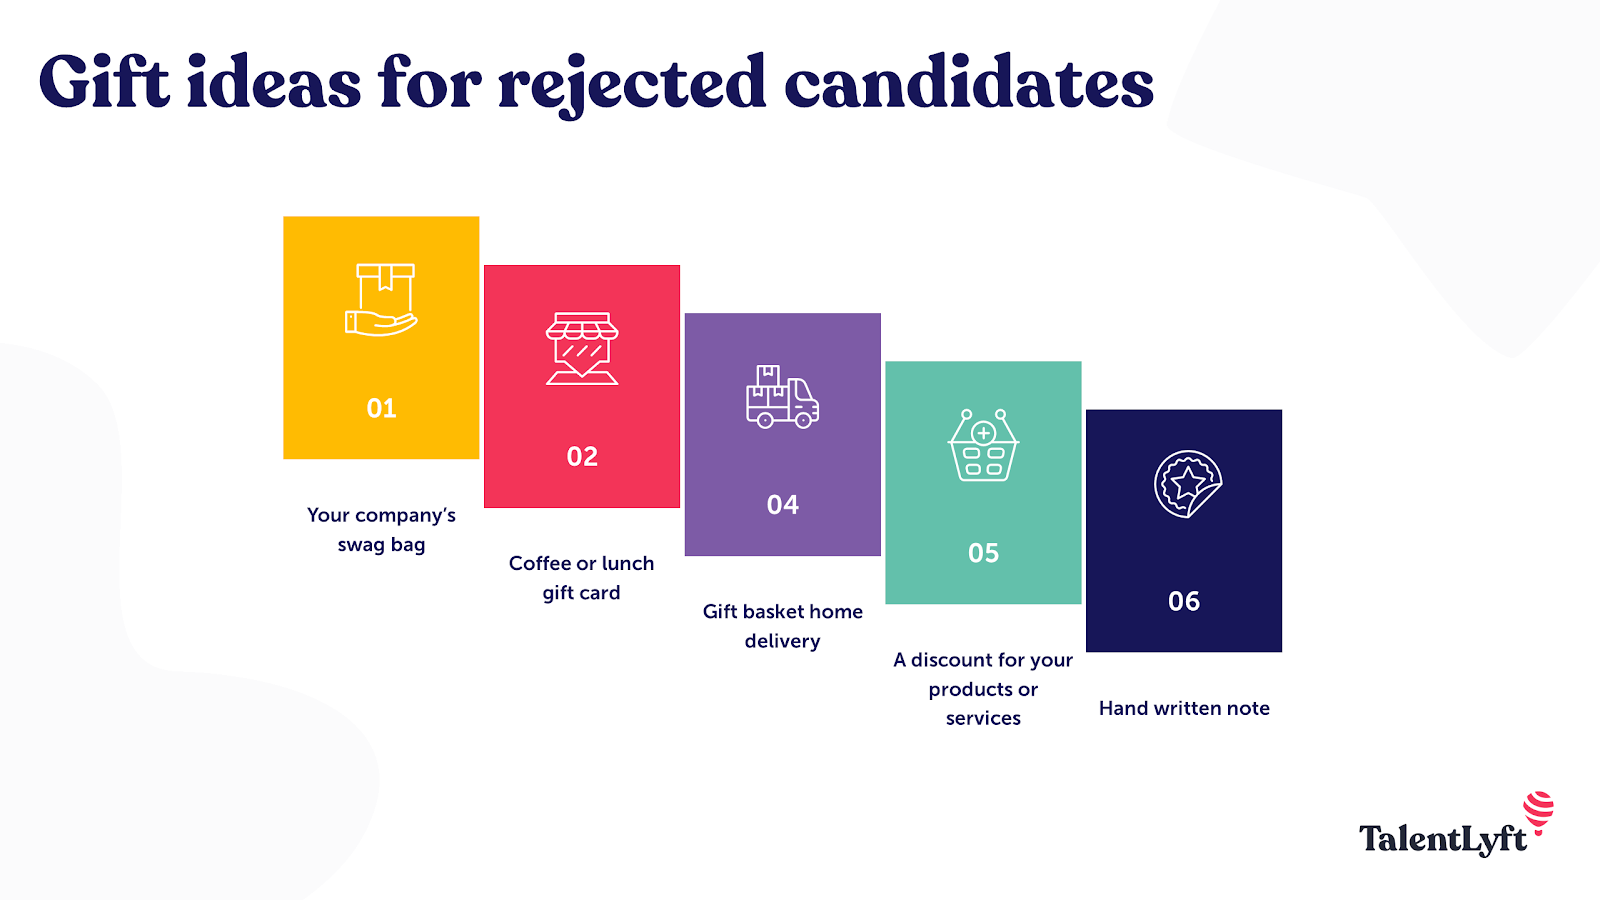 Gift ideas for rejected candidates